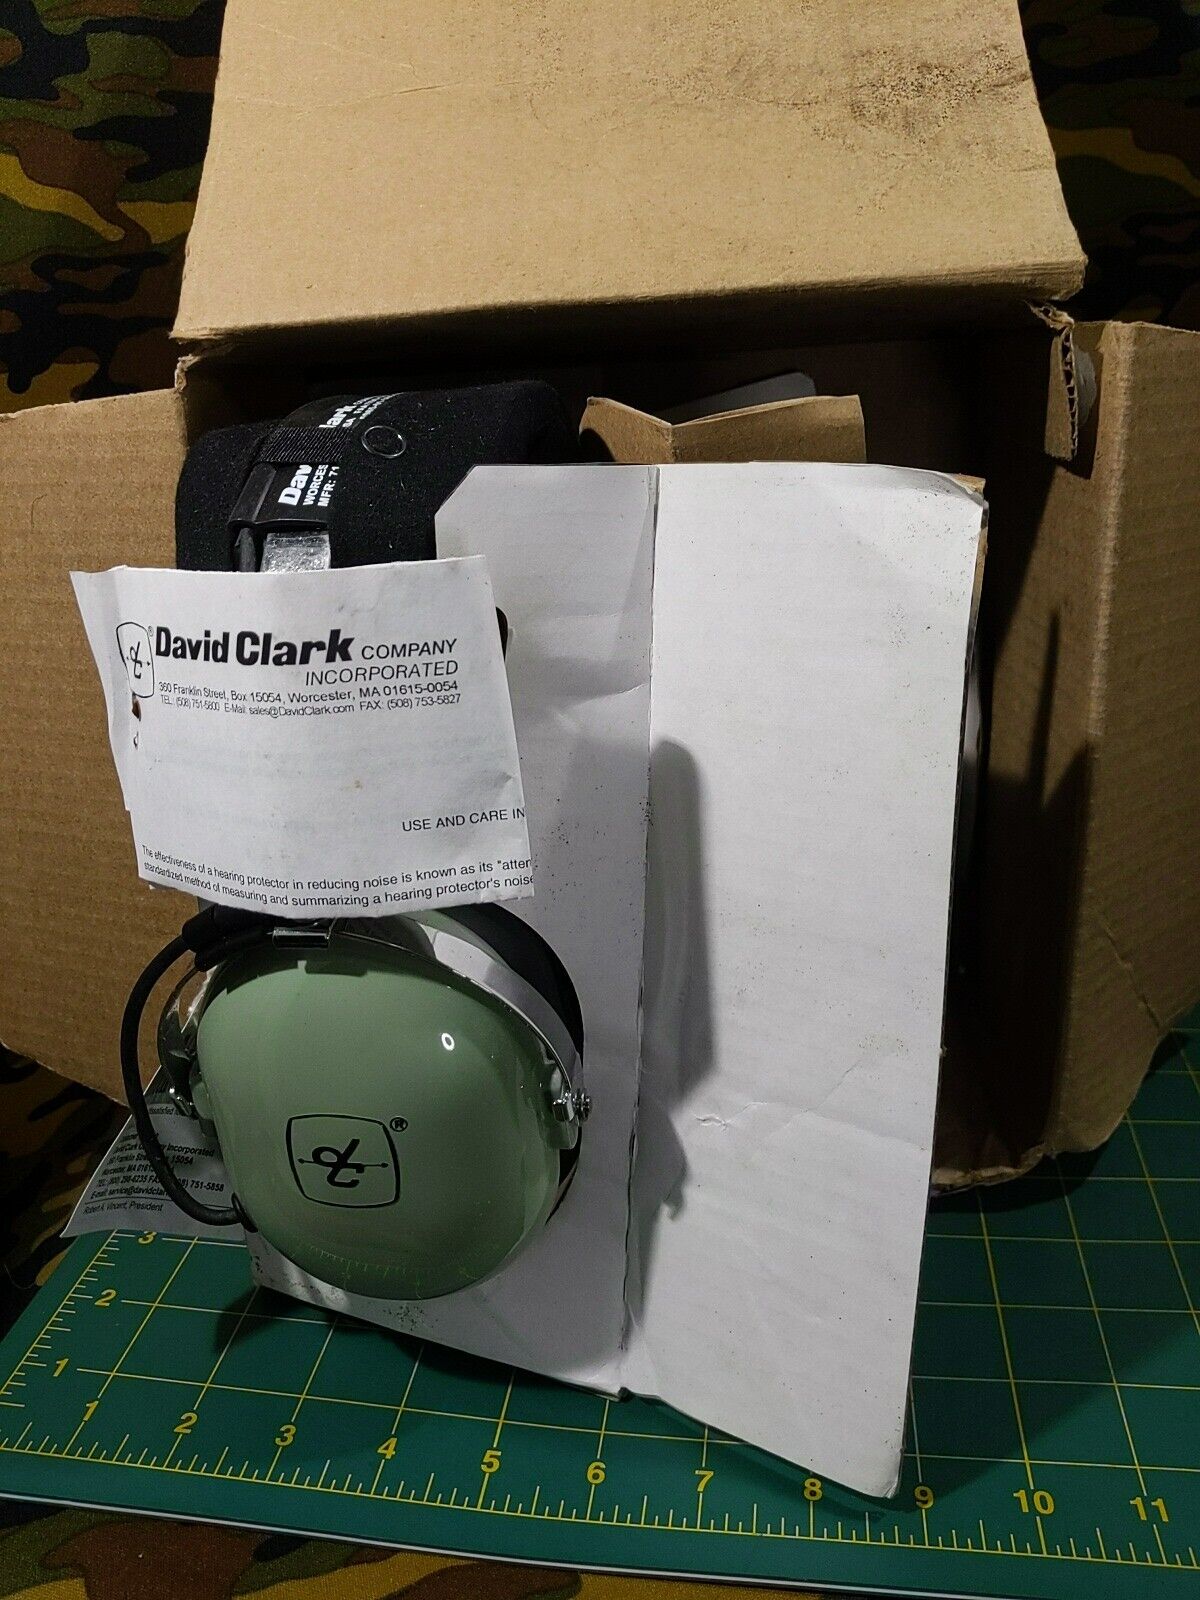 NOS NEW in BOX David Clark Headset H10-76 US Military WORKING +MICRO Plug/Play